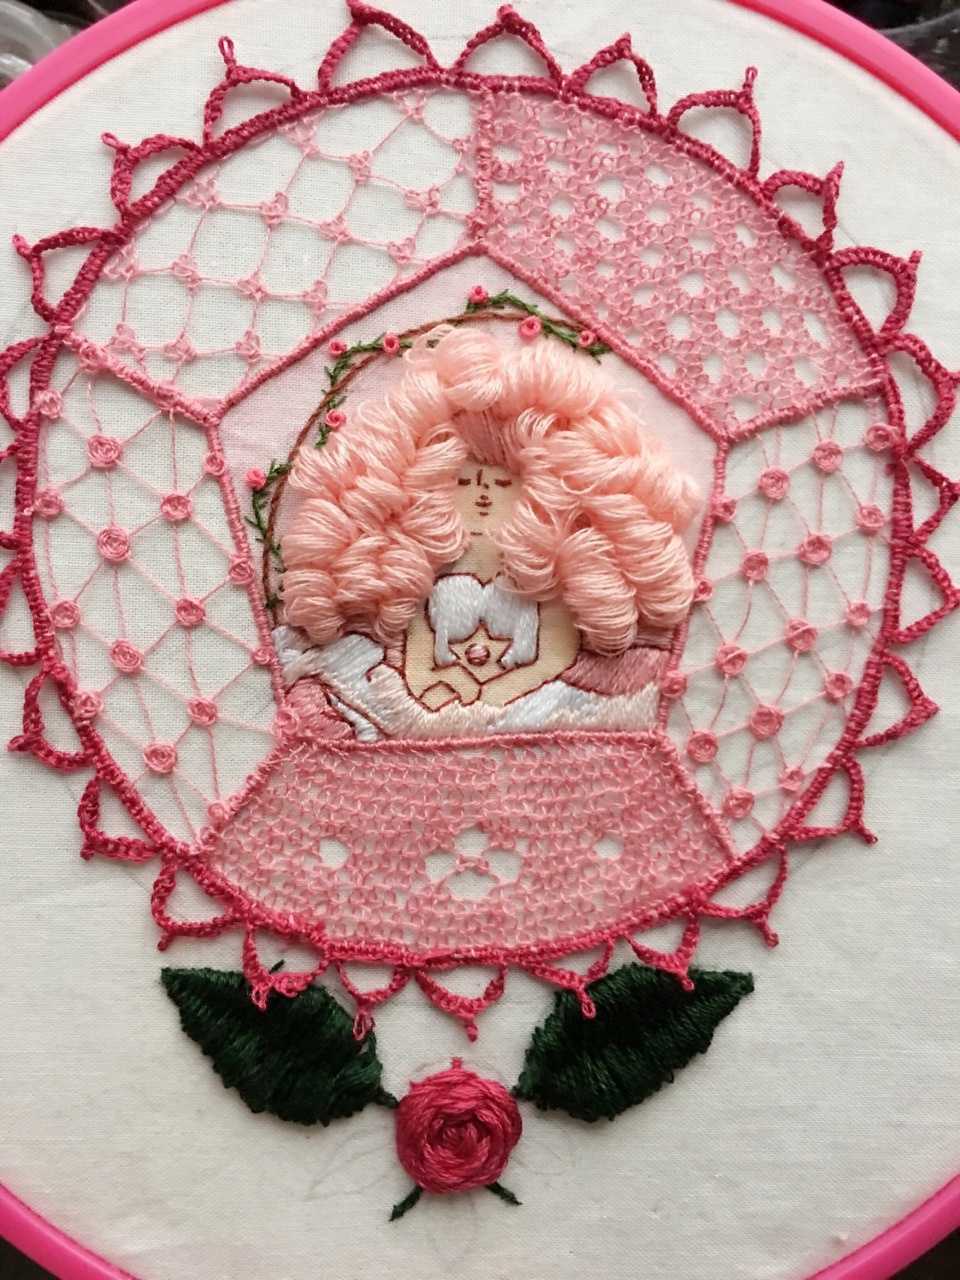 puncturedjuicebox: finished my gfs embroidery and learned a couple lace stitches